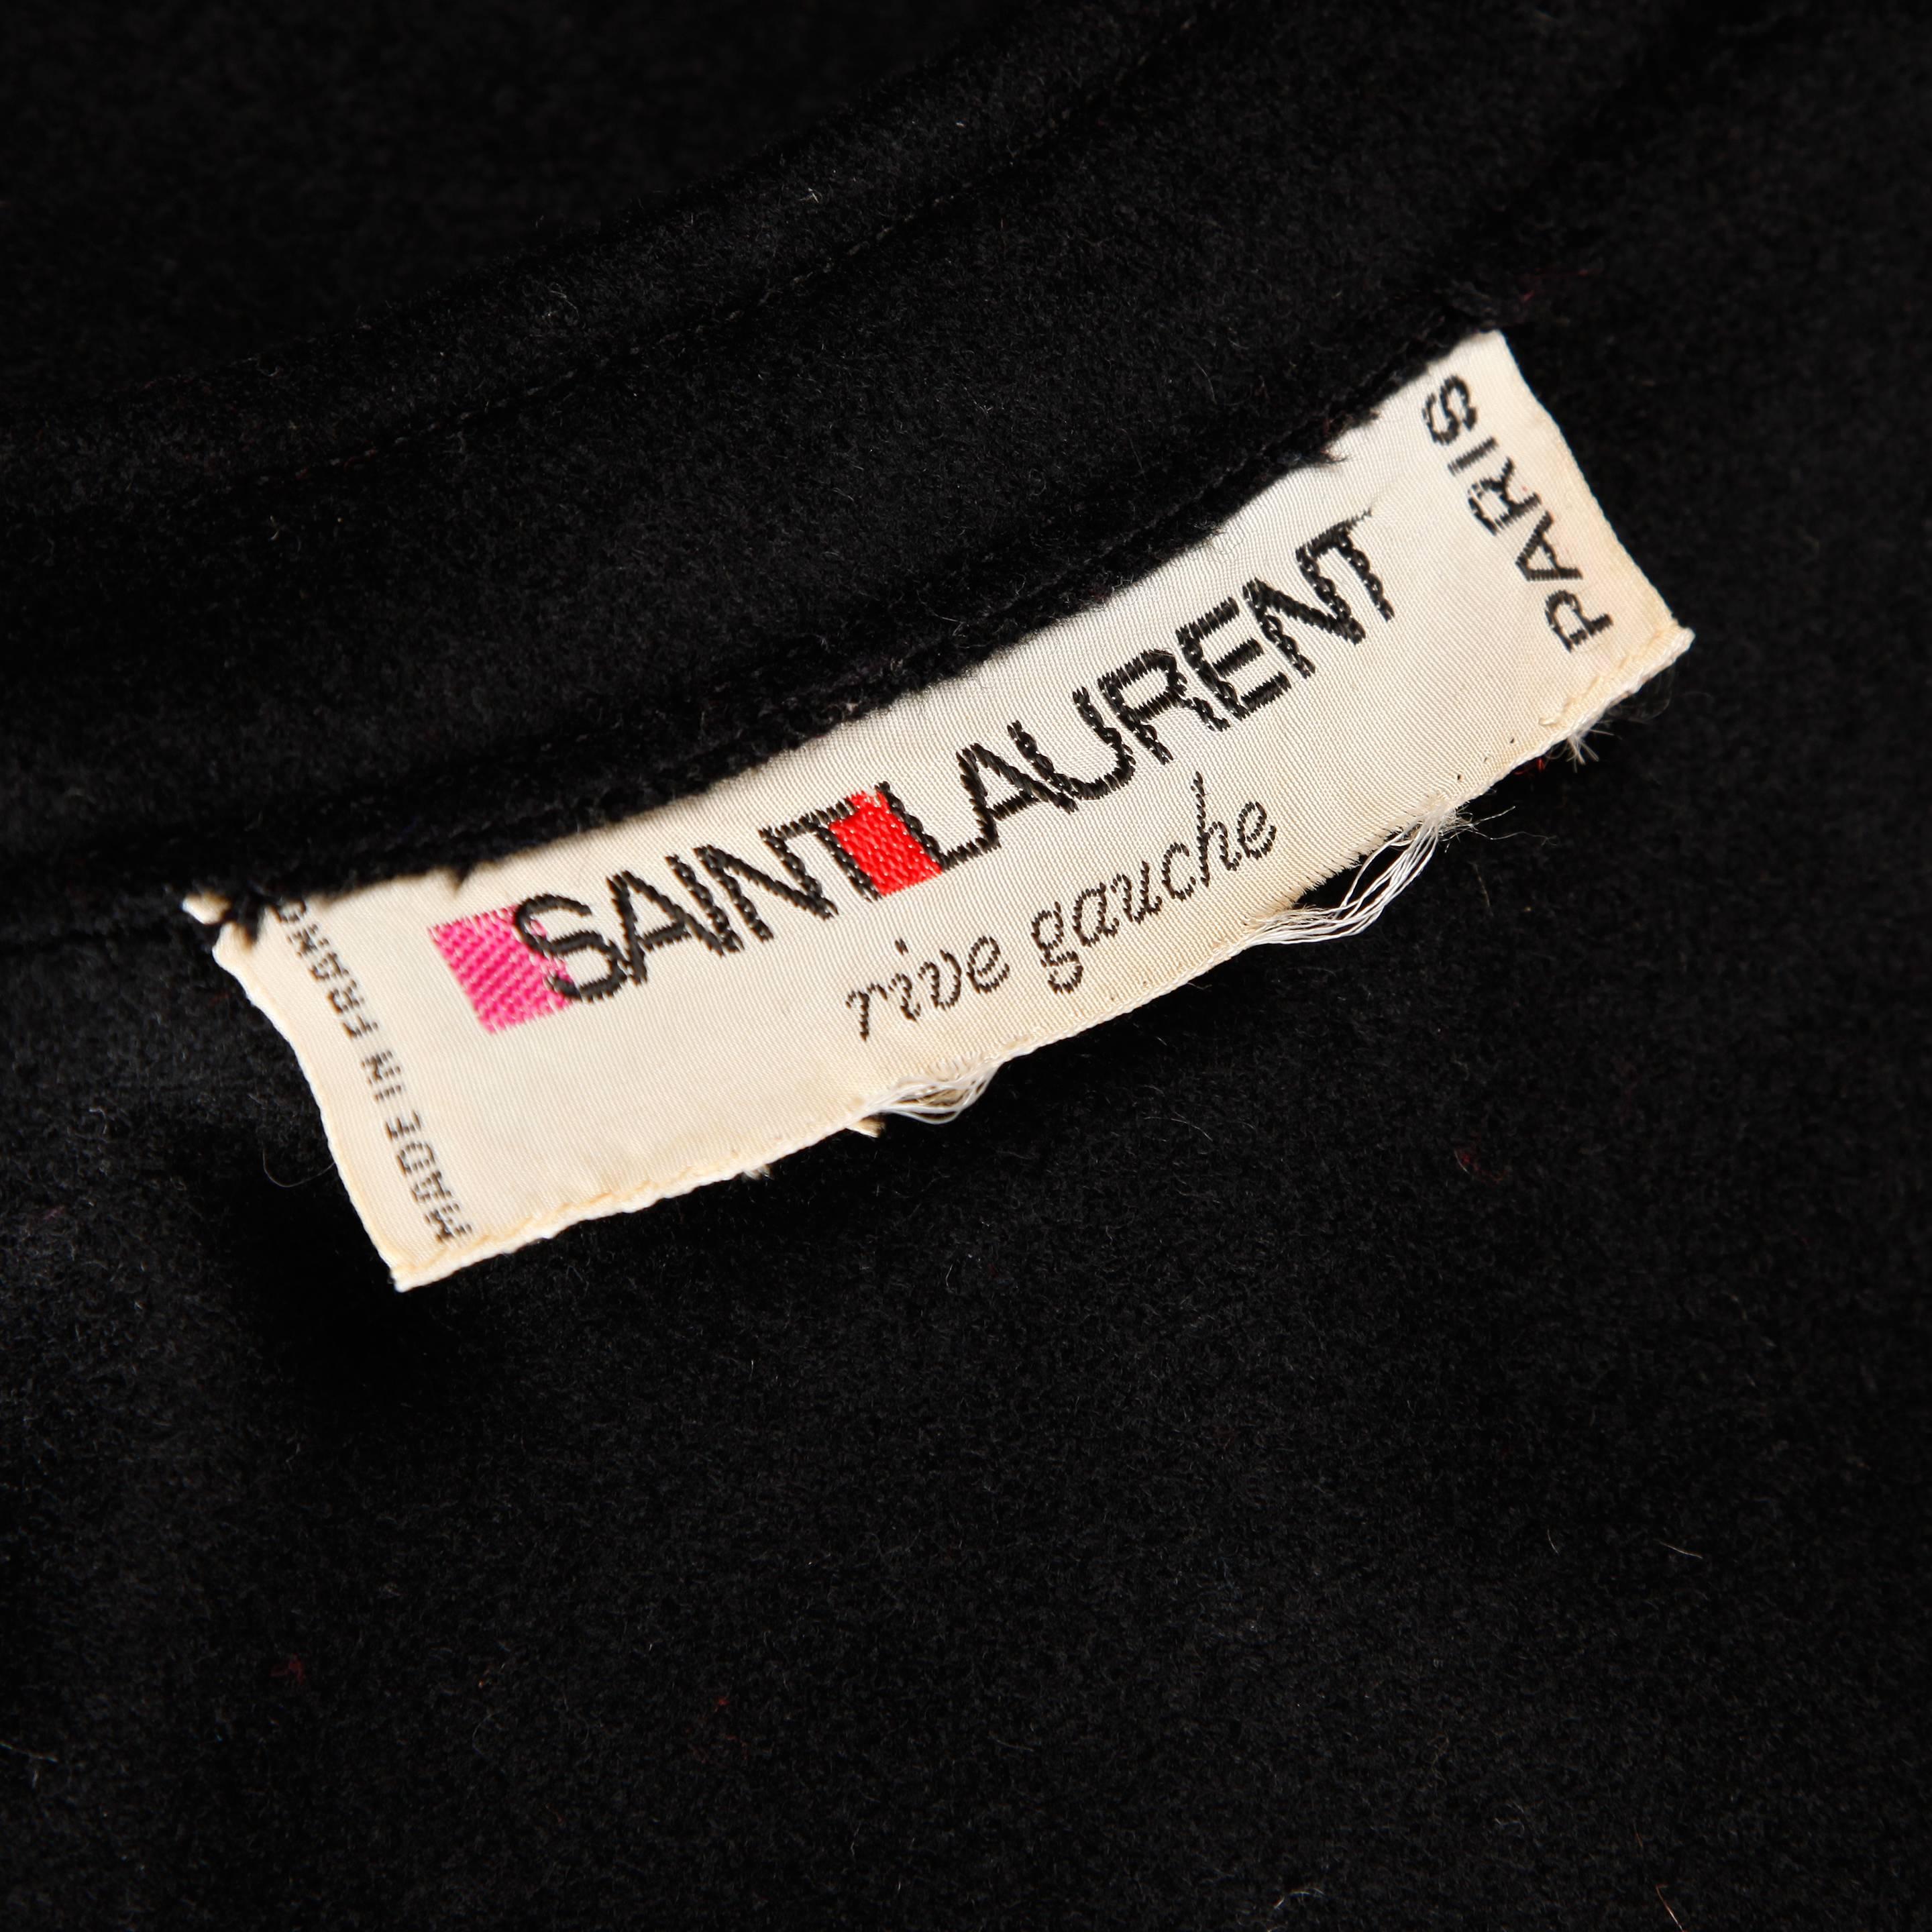 Completely amazing vintage heavy black wool cape coat by Yves Saint Laurent from the 1970s. The cape features two layers with giant bat wing sleeves and front button closure. Long maxi length. Early Yves Saint Laurent Rive Gauche label. Fits most